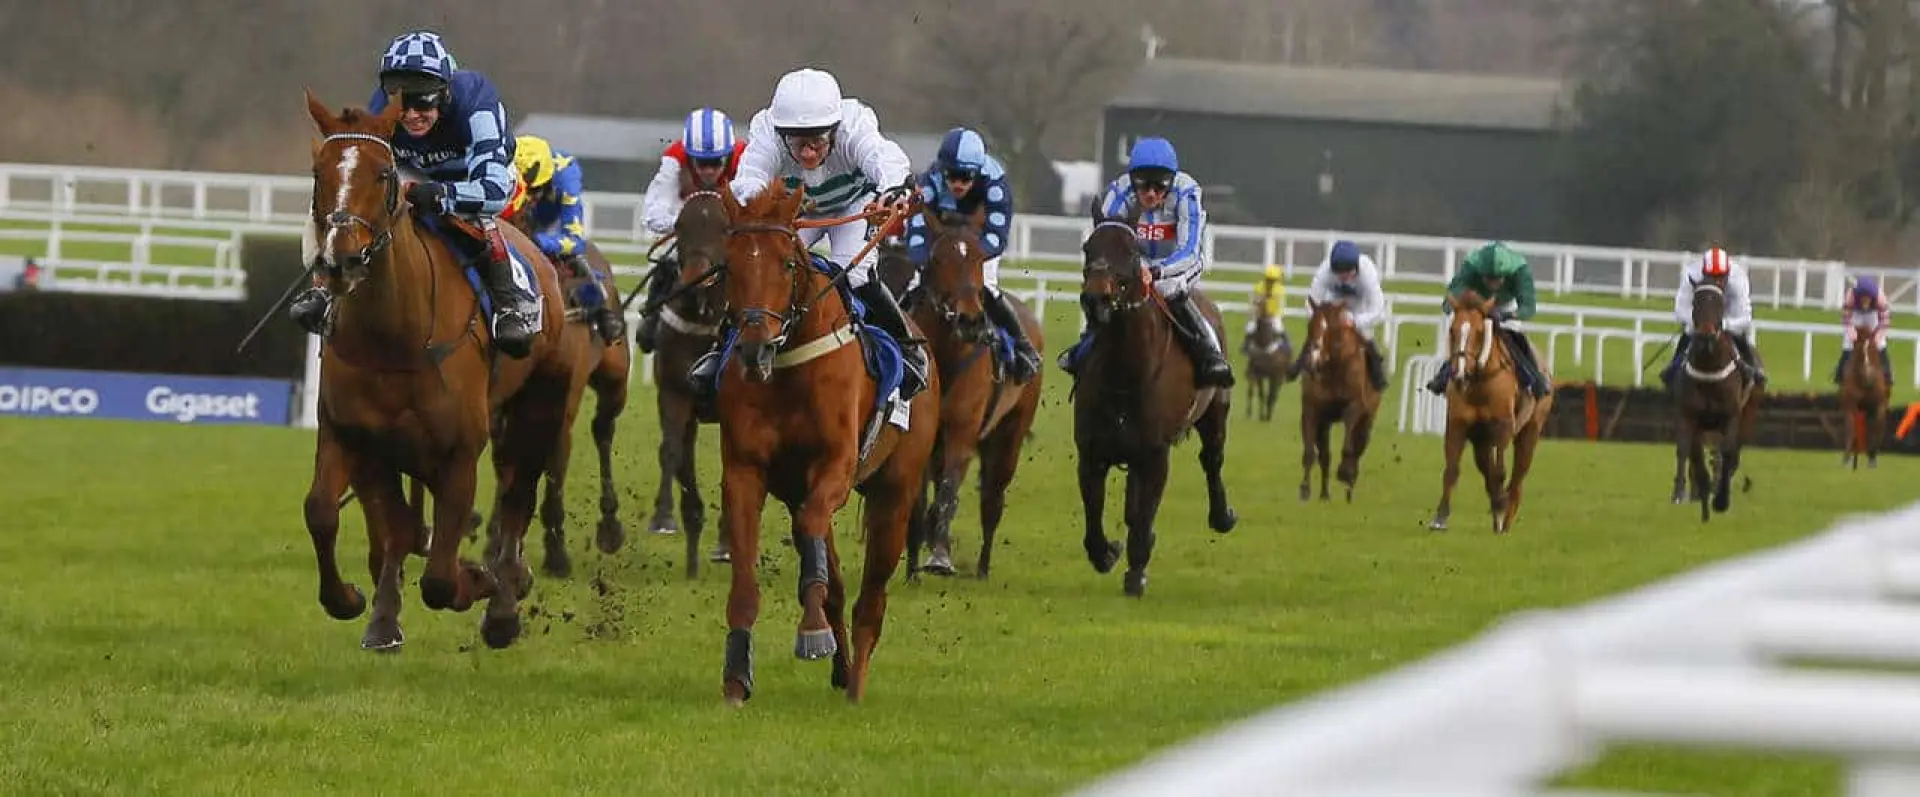 Baron Alco odds and Formidableopponent bets are among Coral's Plumpton punts and Musselburgh tips for November 14.